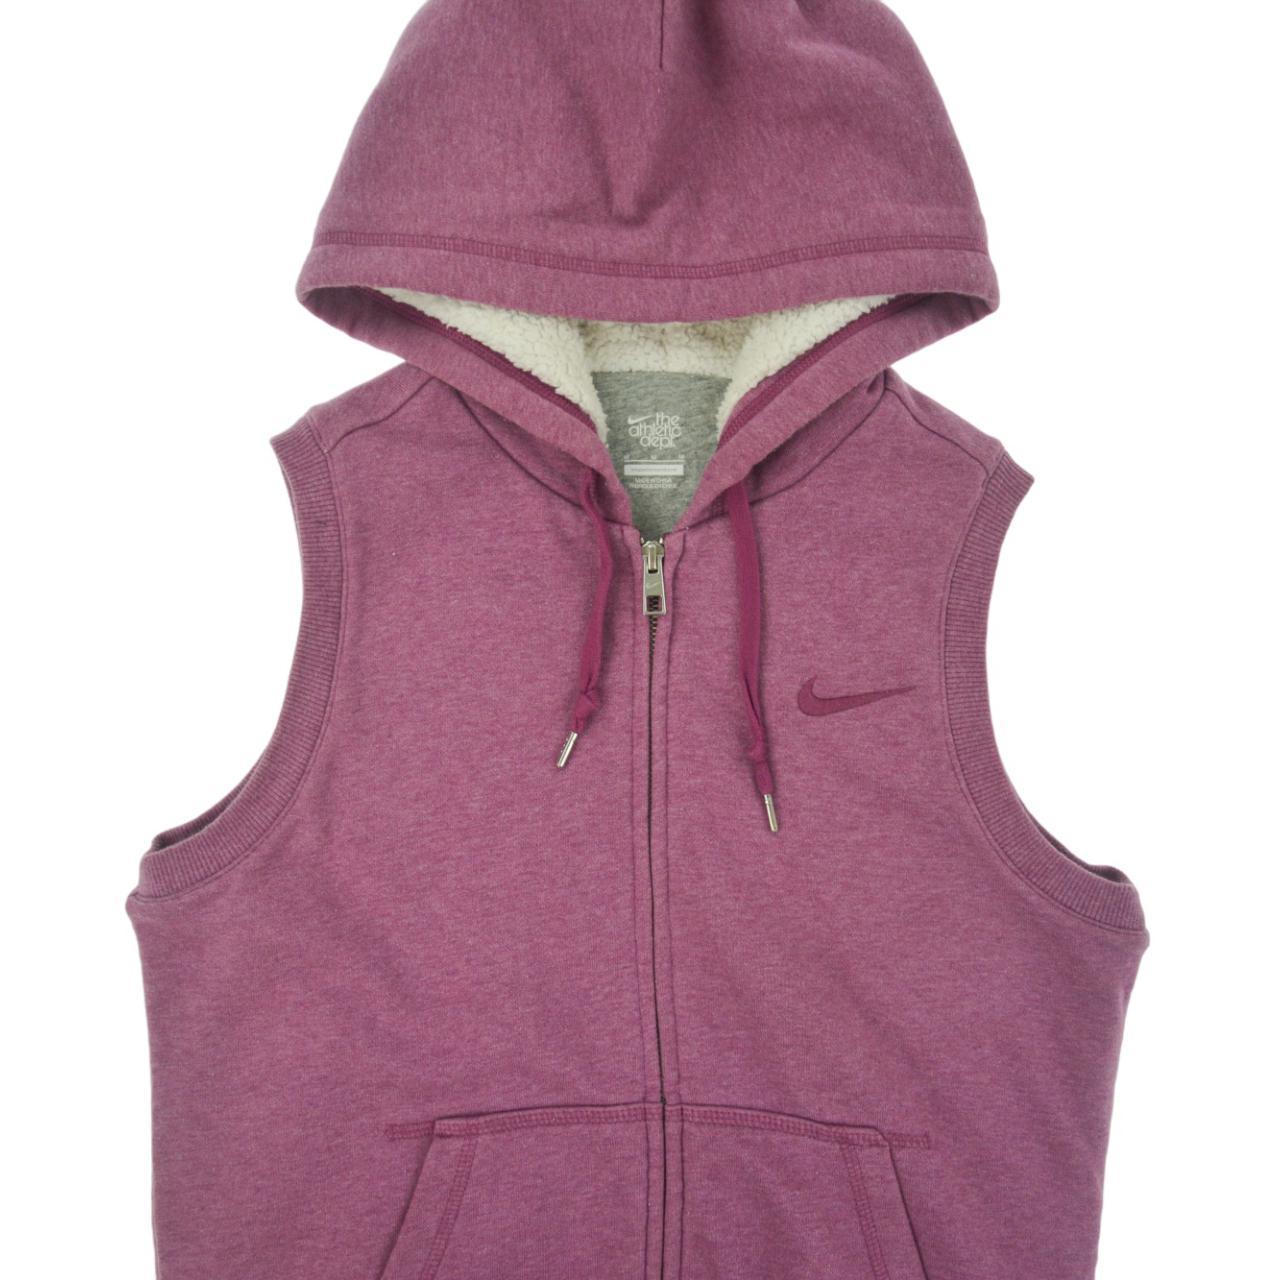 Nike Hooded Vest Woman’s Size M - Known Source